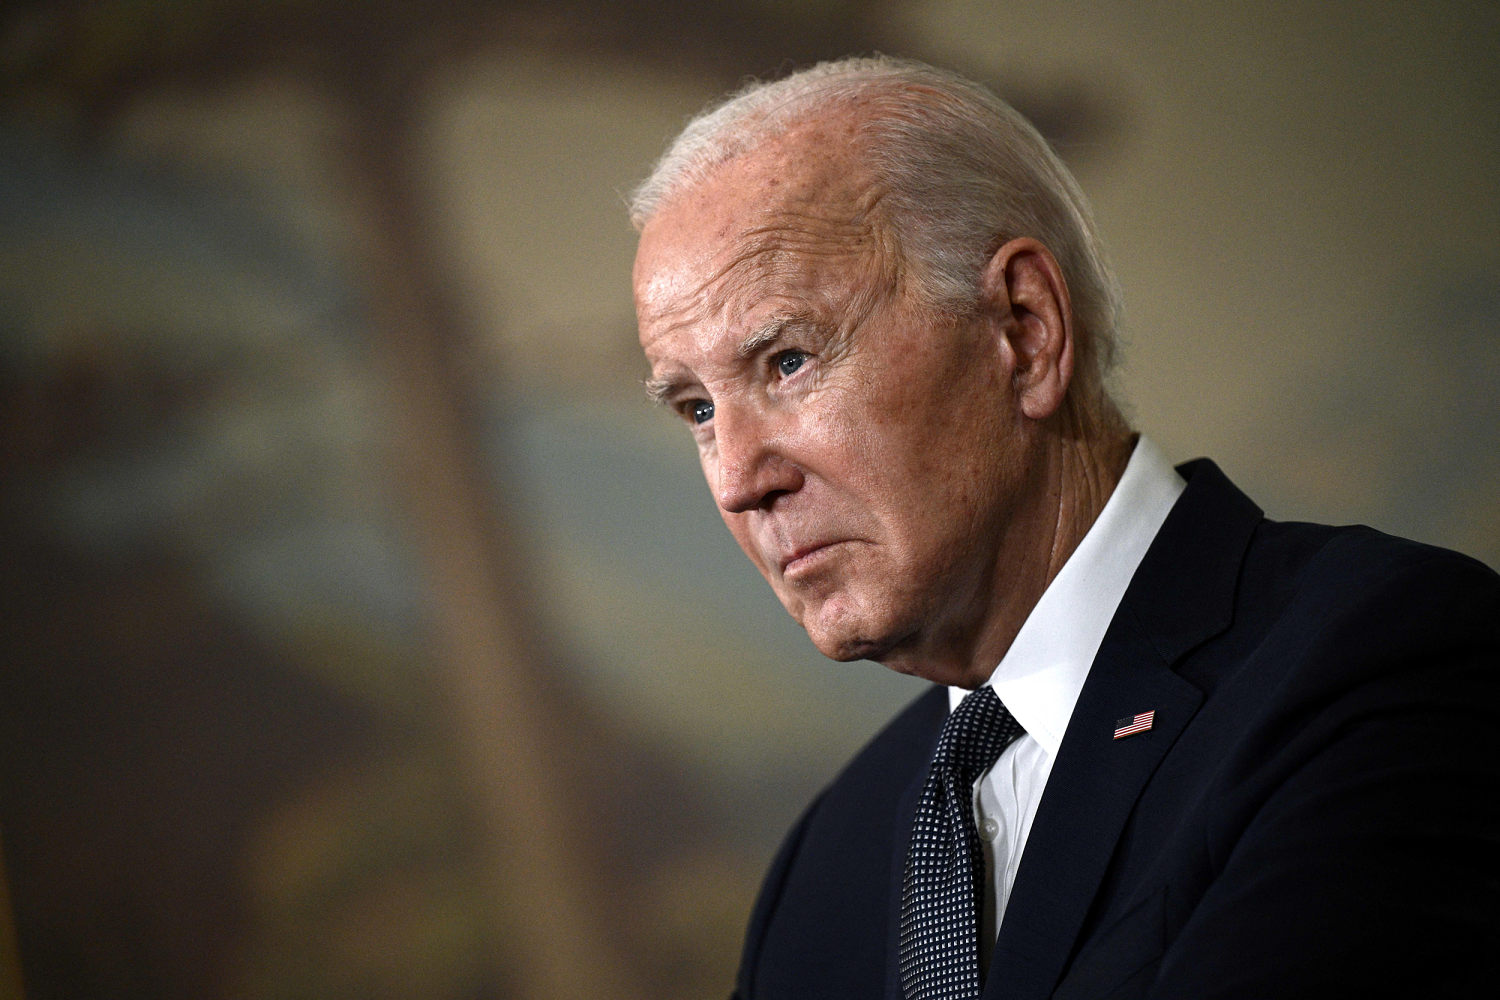 House committees escalate impeachment probe by demanding White House documents on Hunter Biden